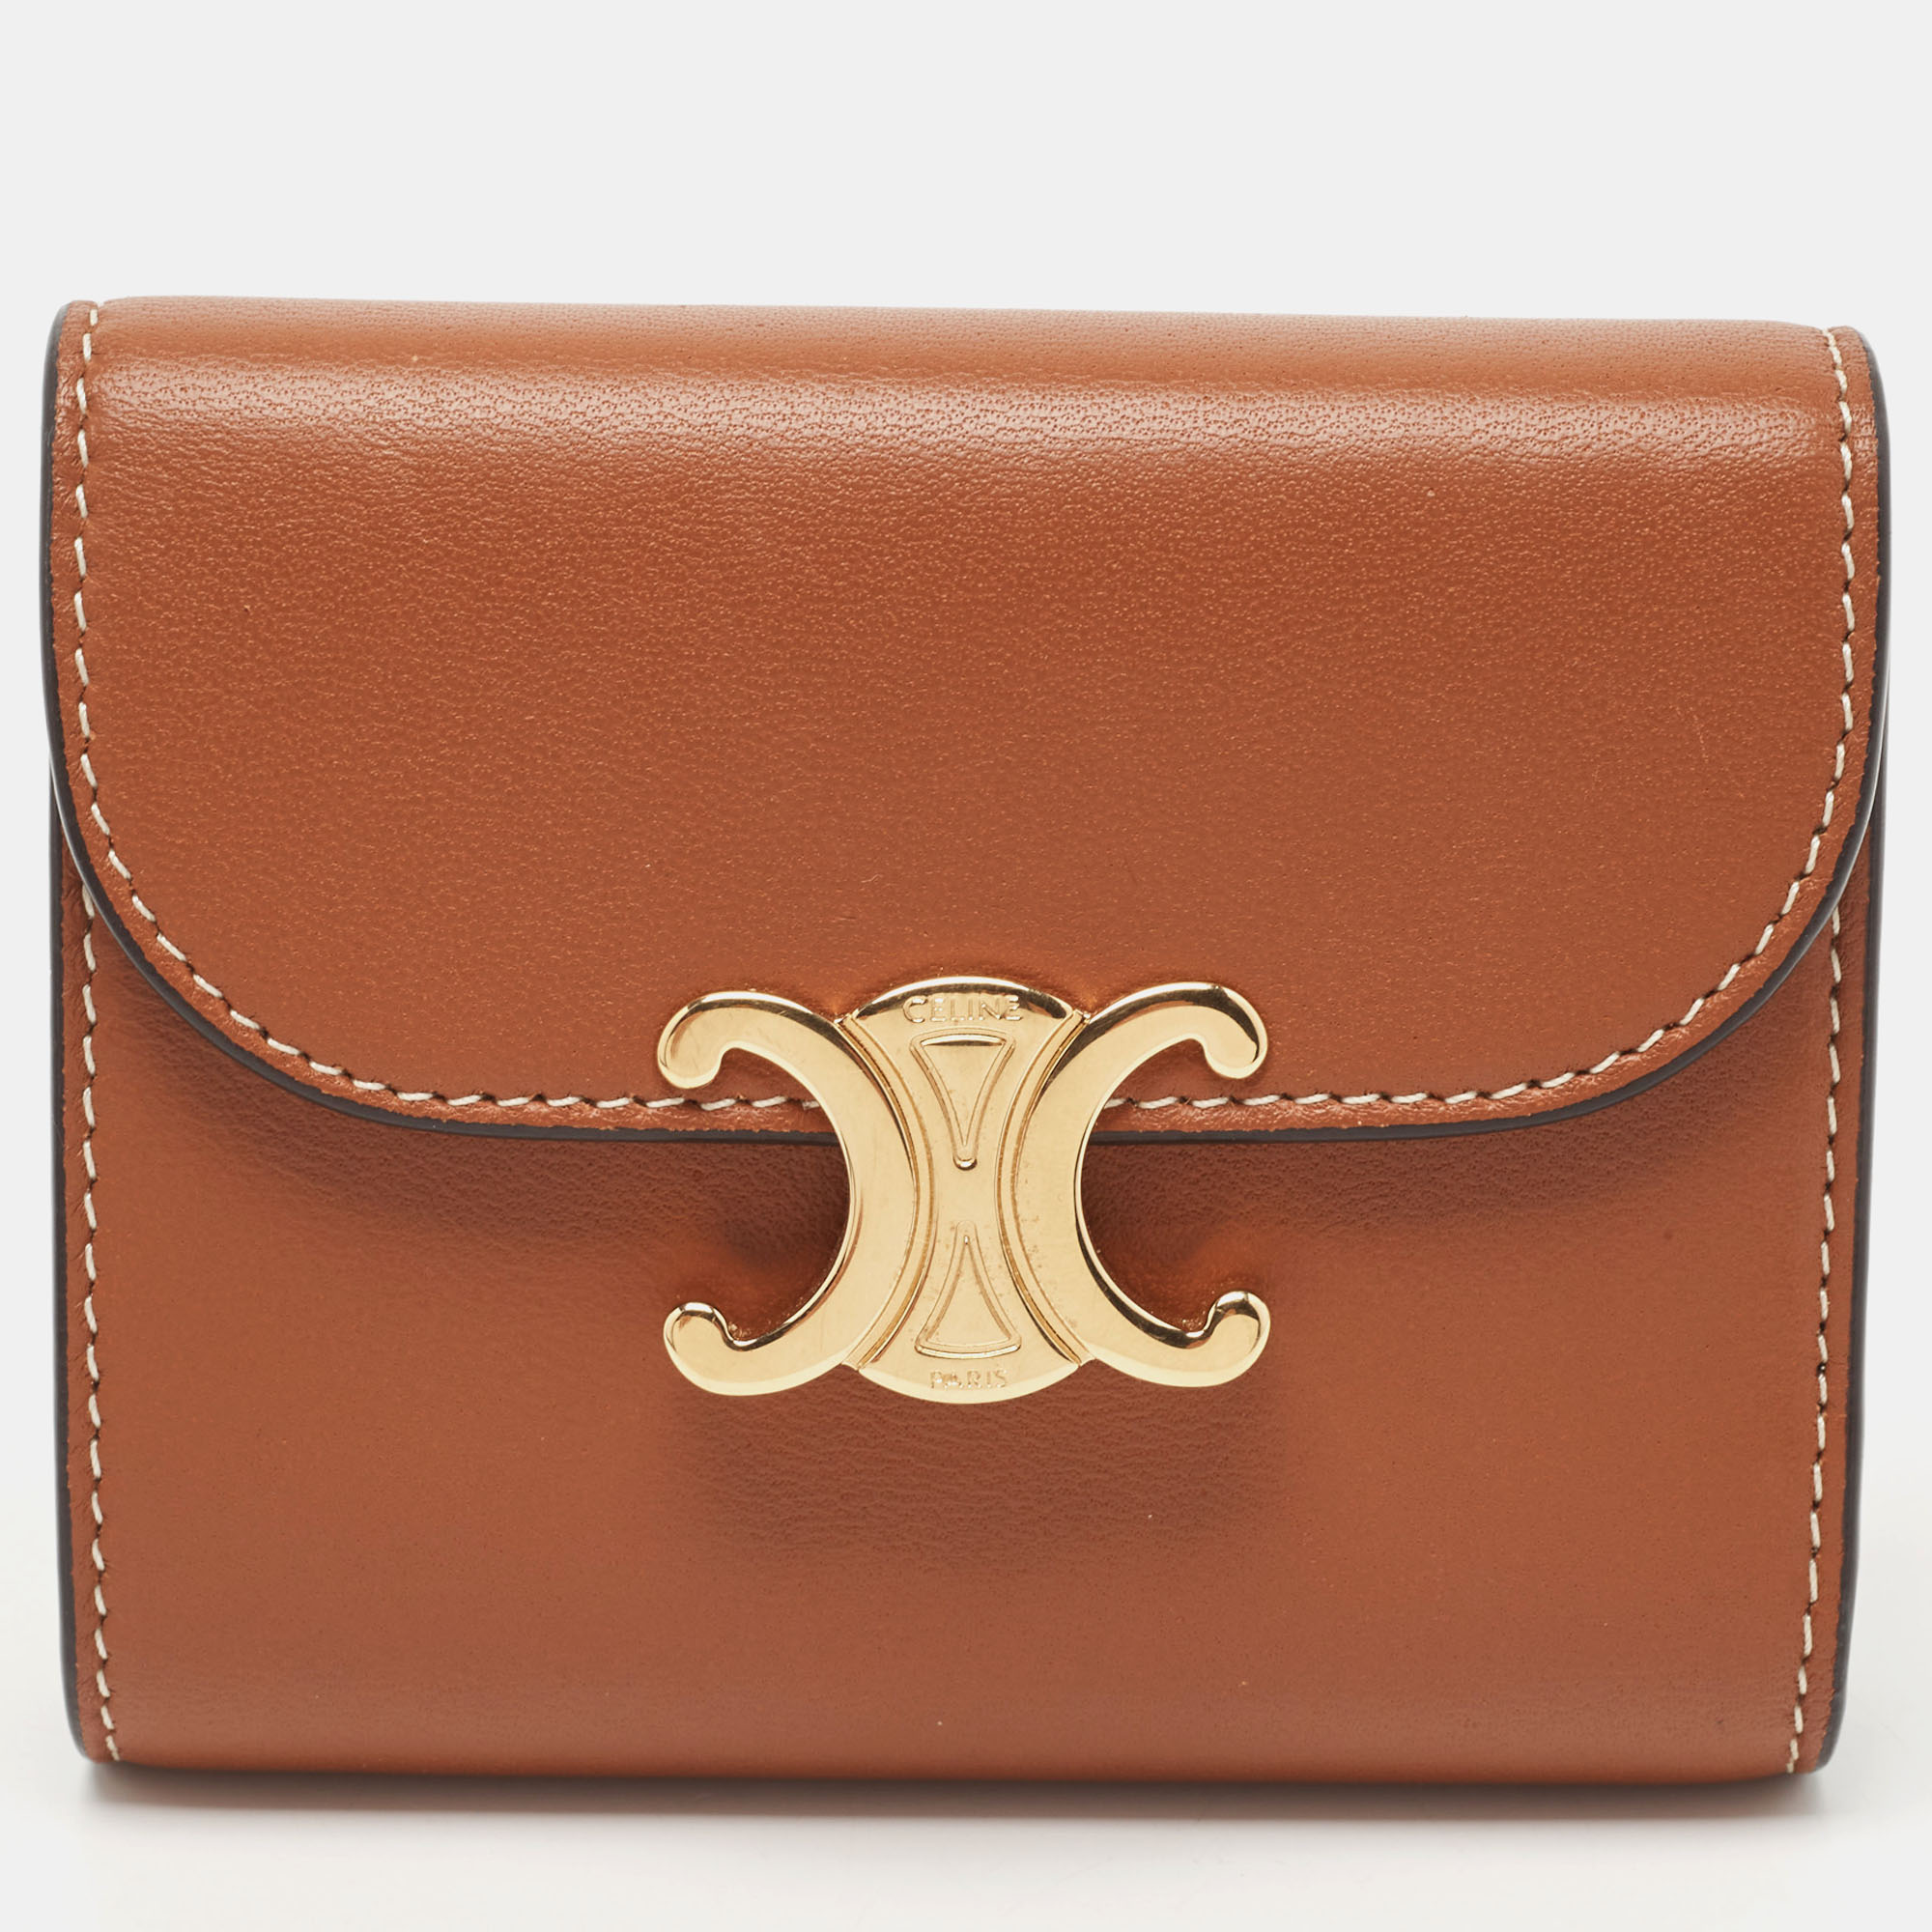 Celine Brown Leather Small Triomphe Compact Wallet Celine